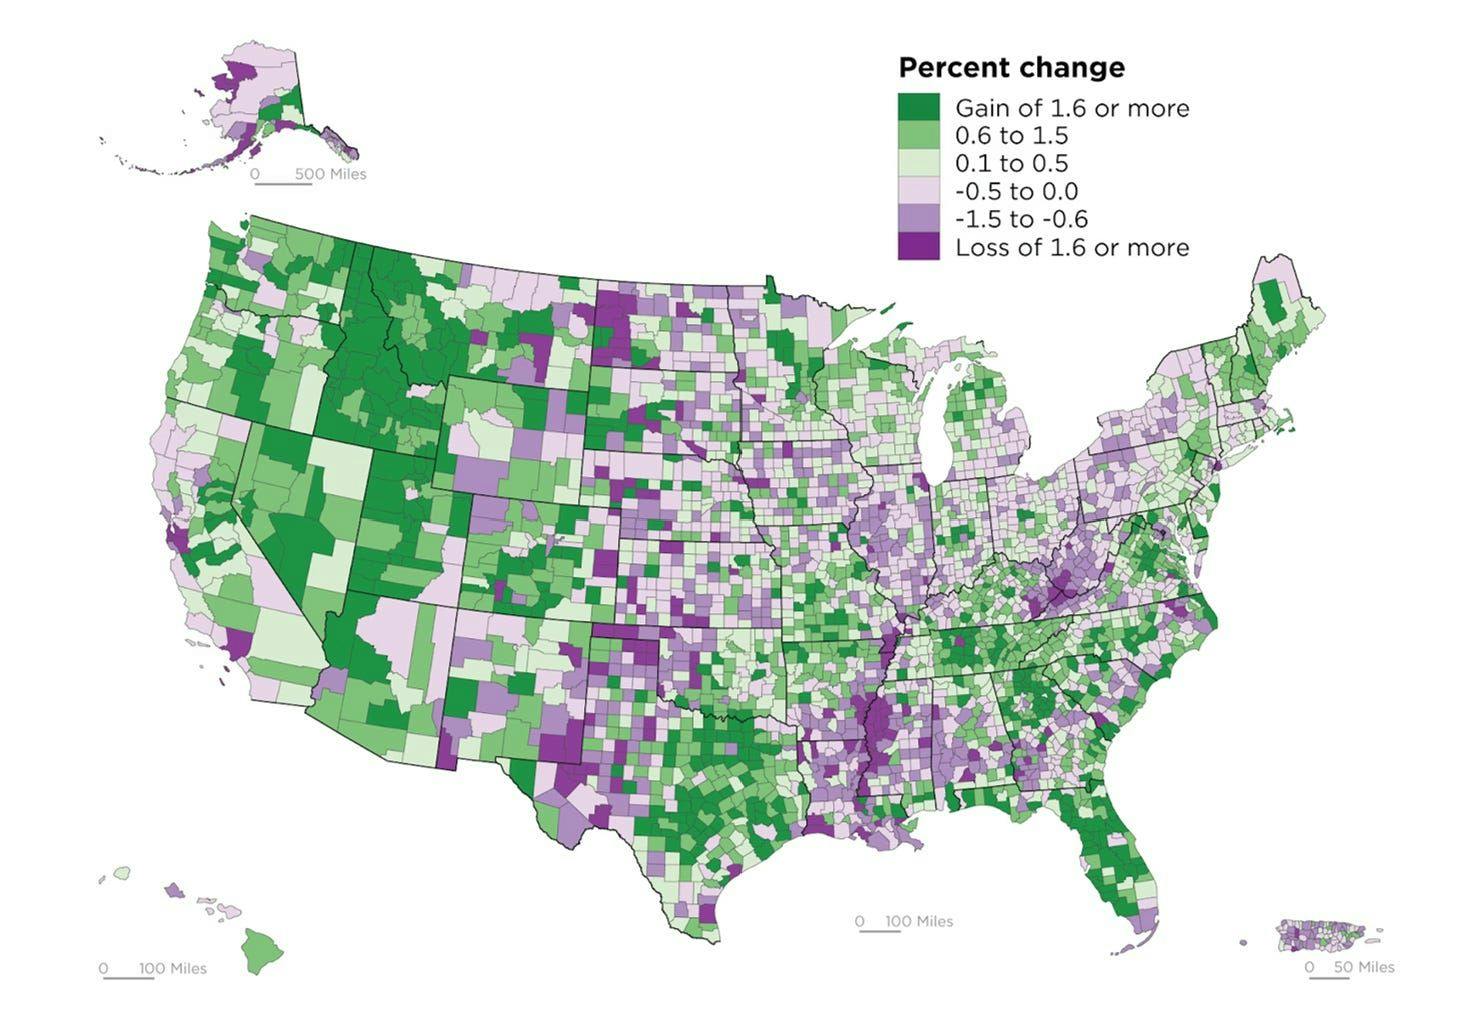 A map of how county populations are changing in the US